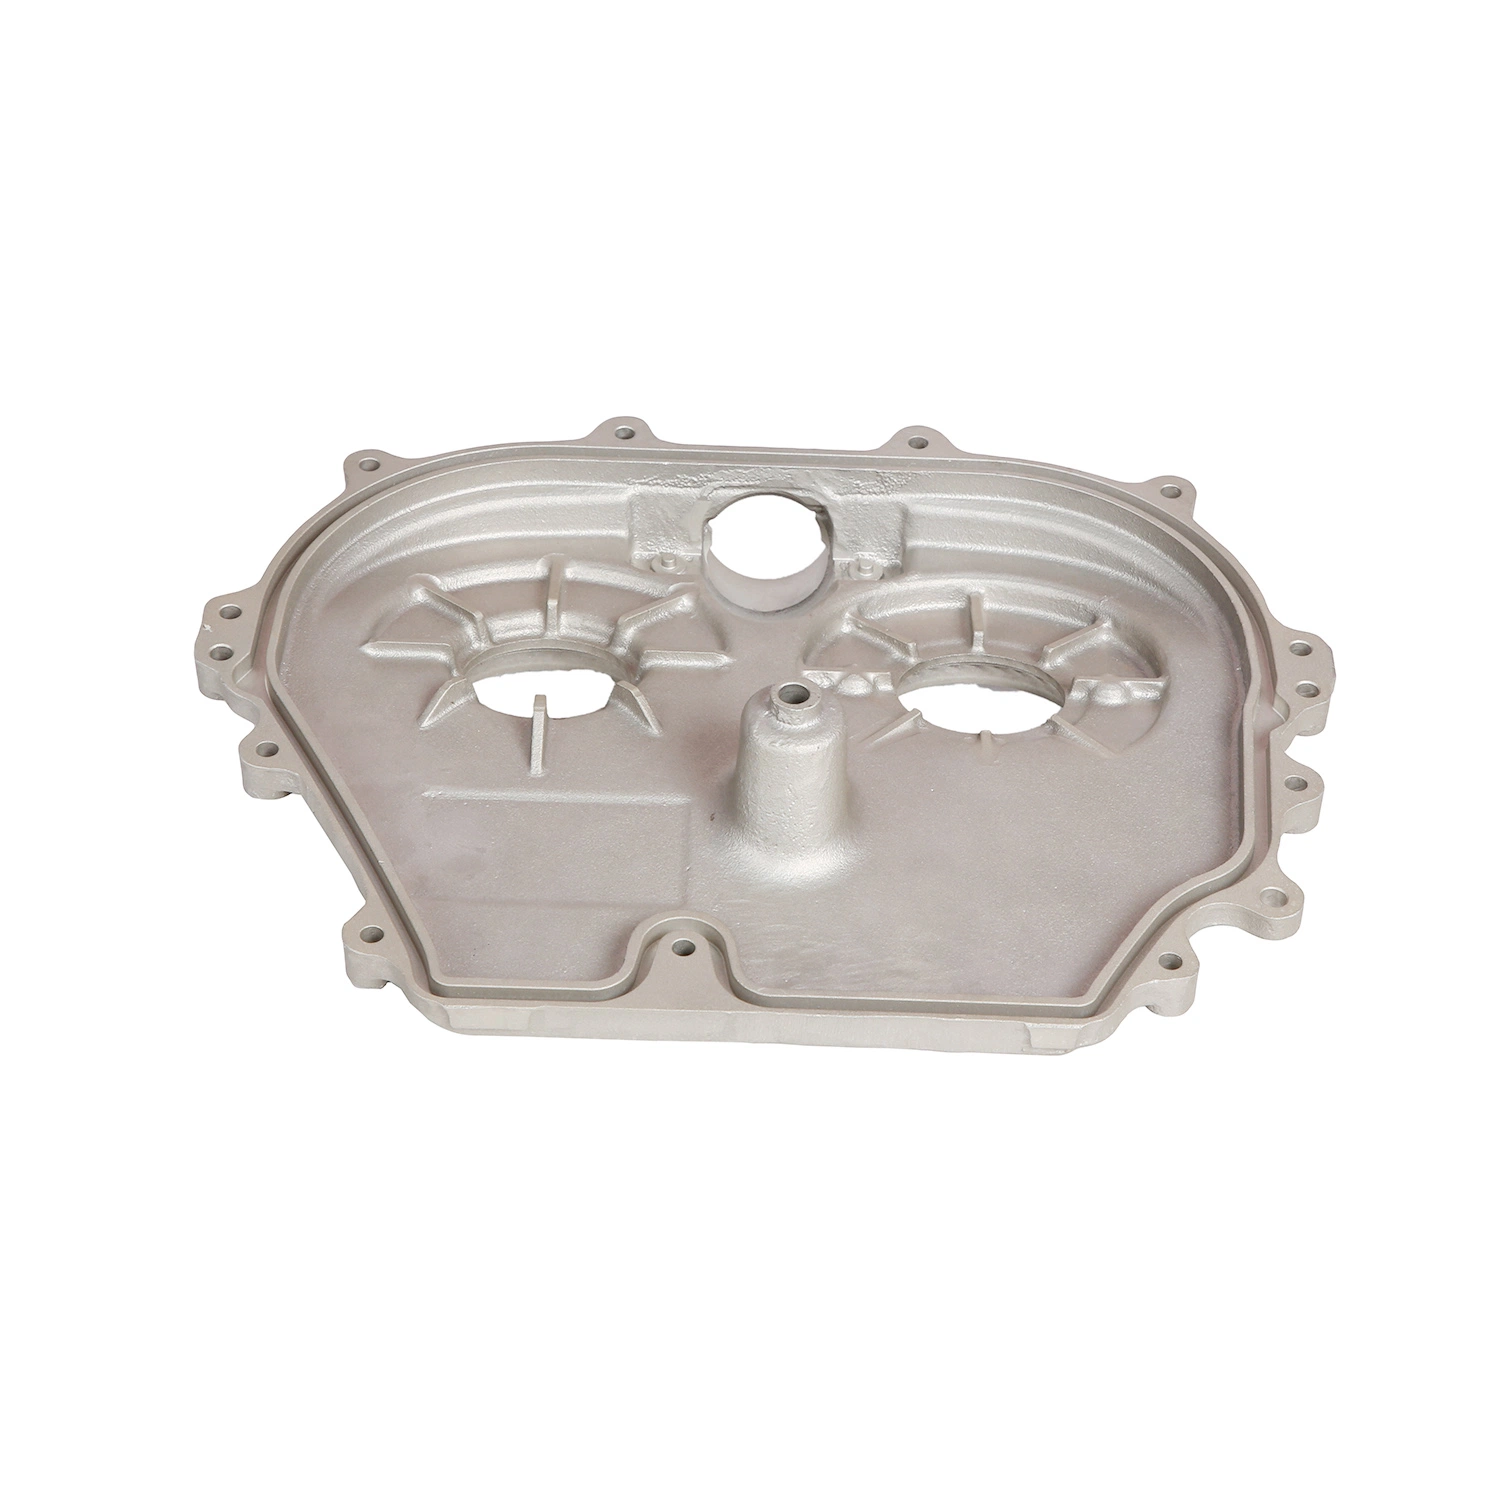 OEM Customized Auto Gearbox Casing Housing Cover Part Foundry by Rapid Prototyping of 3D Printing Sand Casting